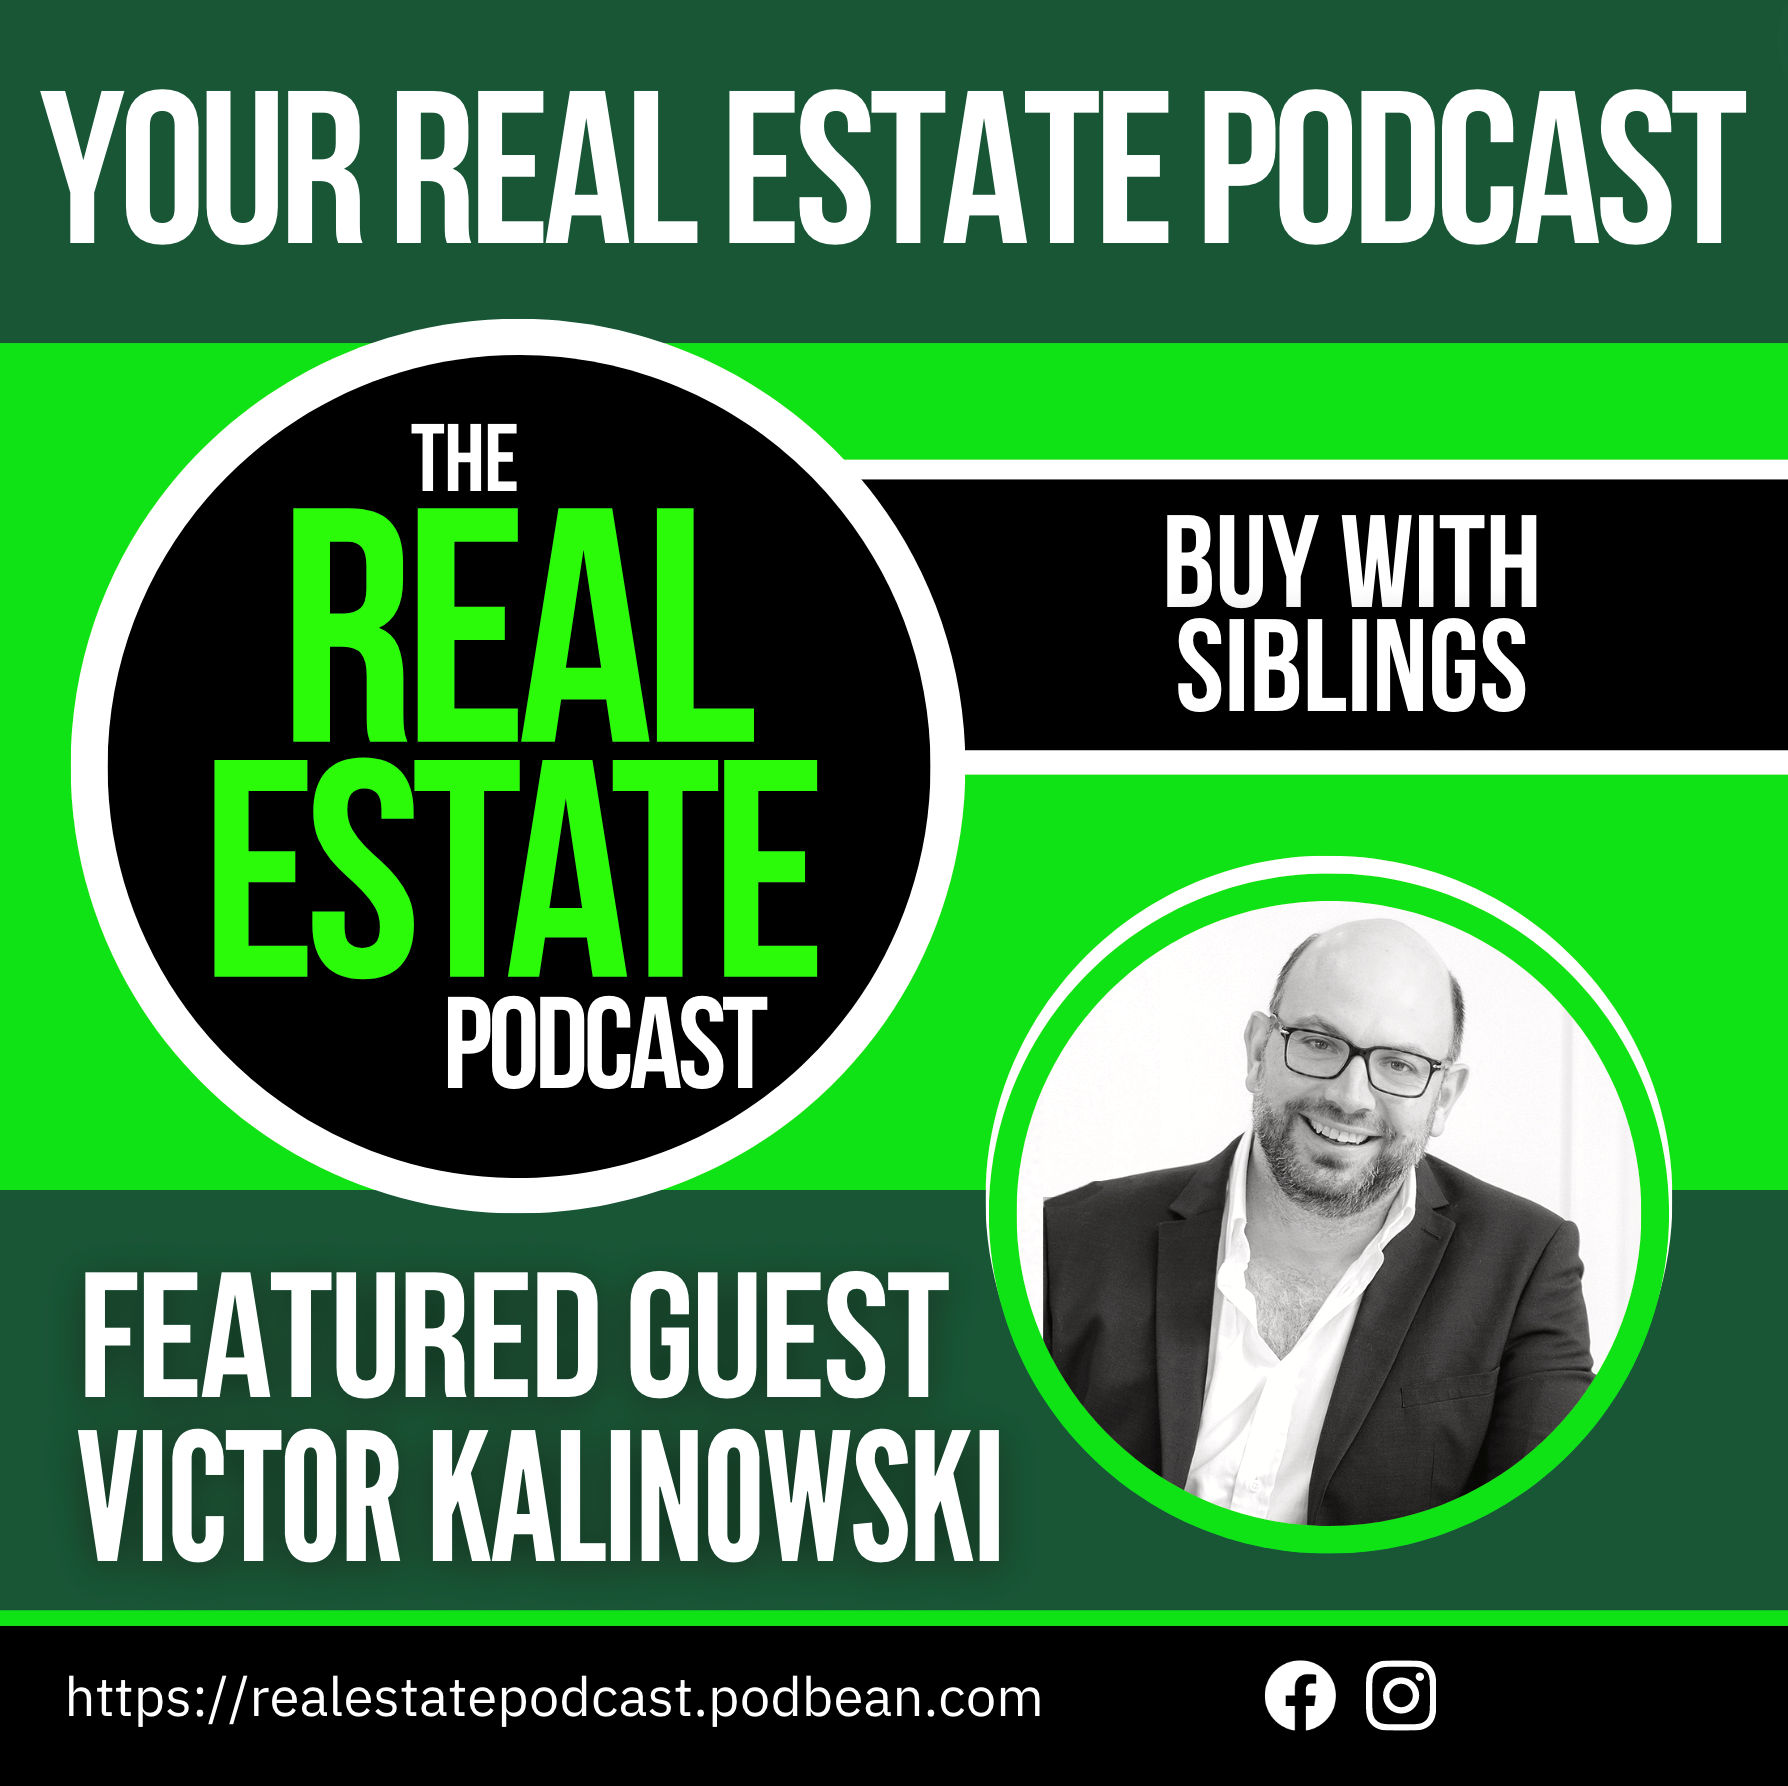 Buying property with siblings podcast_blackkfinance